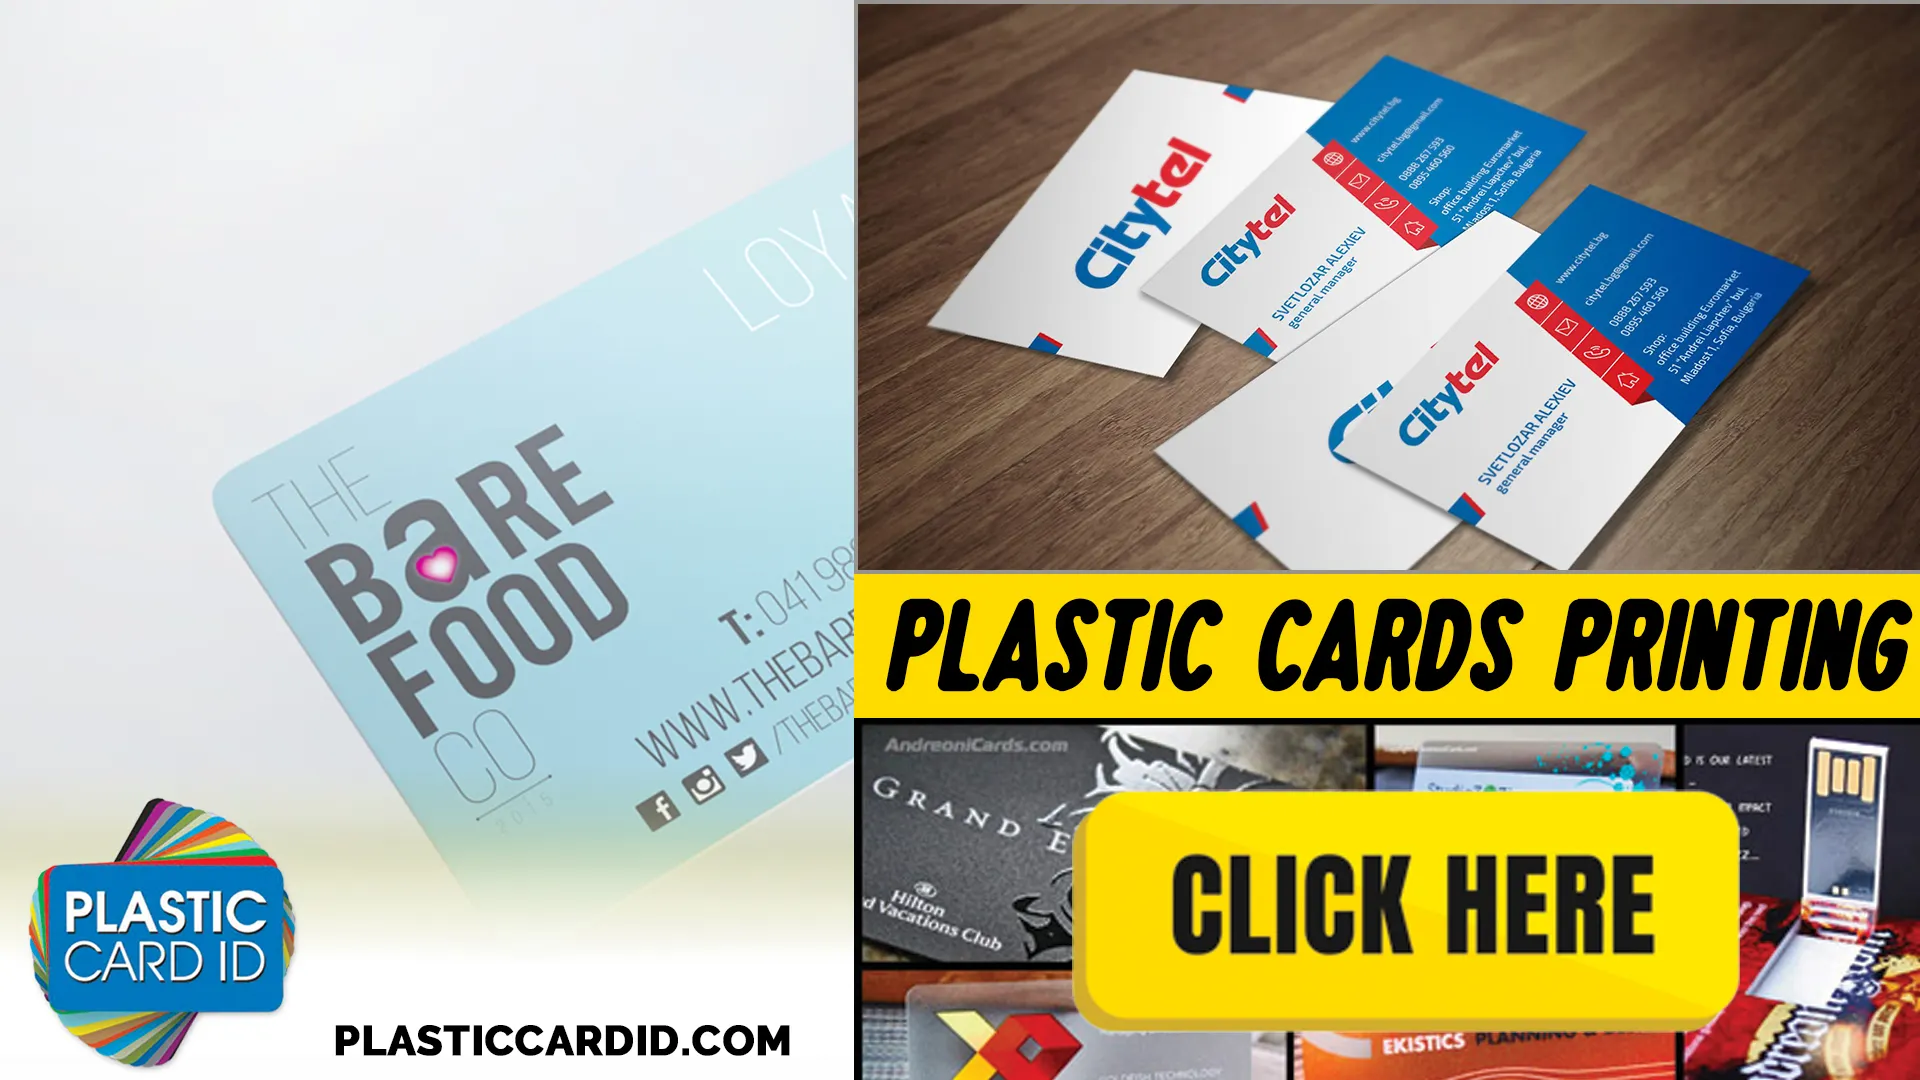 Plastic Card ID
: Innovating Customer Experience with Key Tags